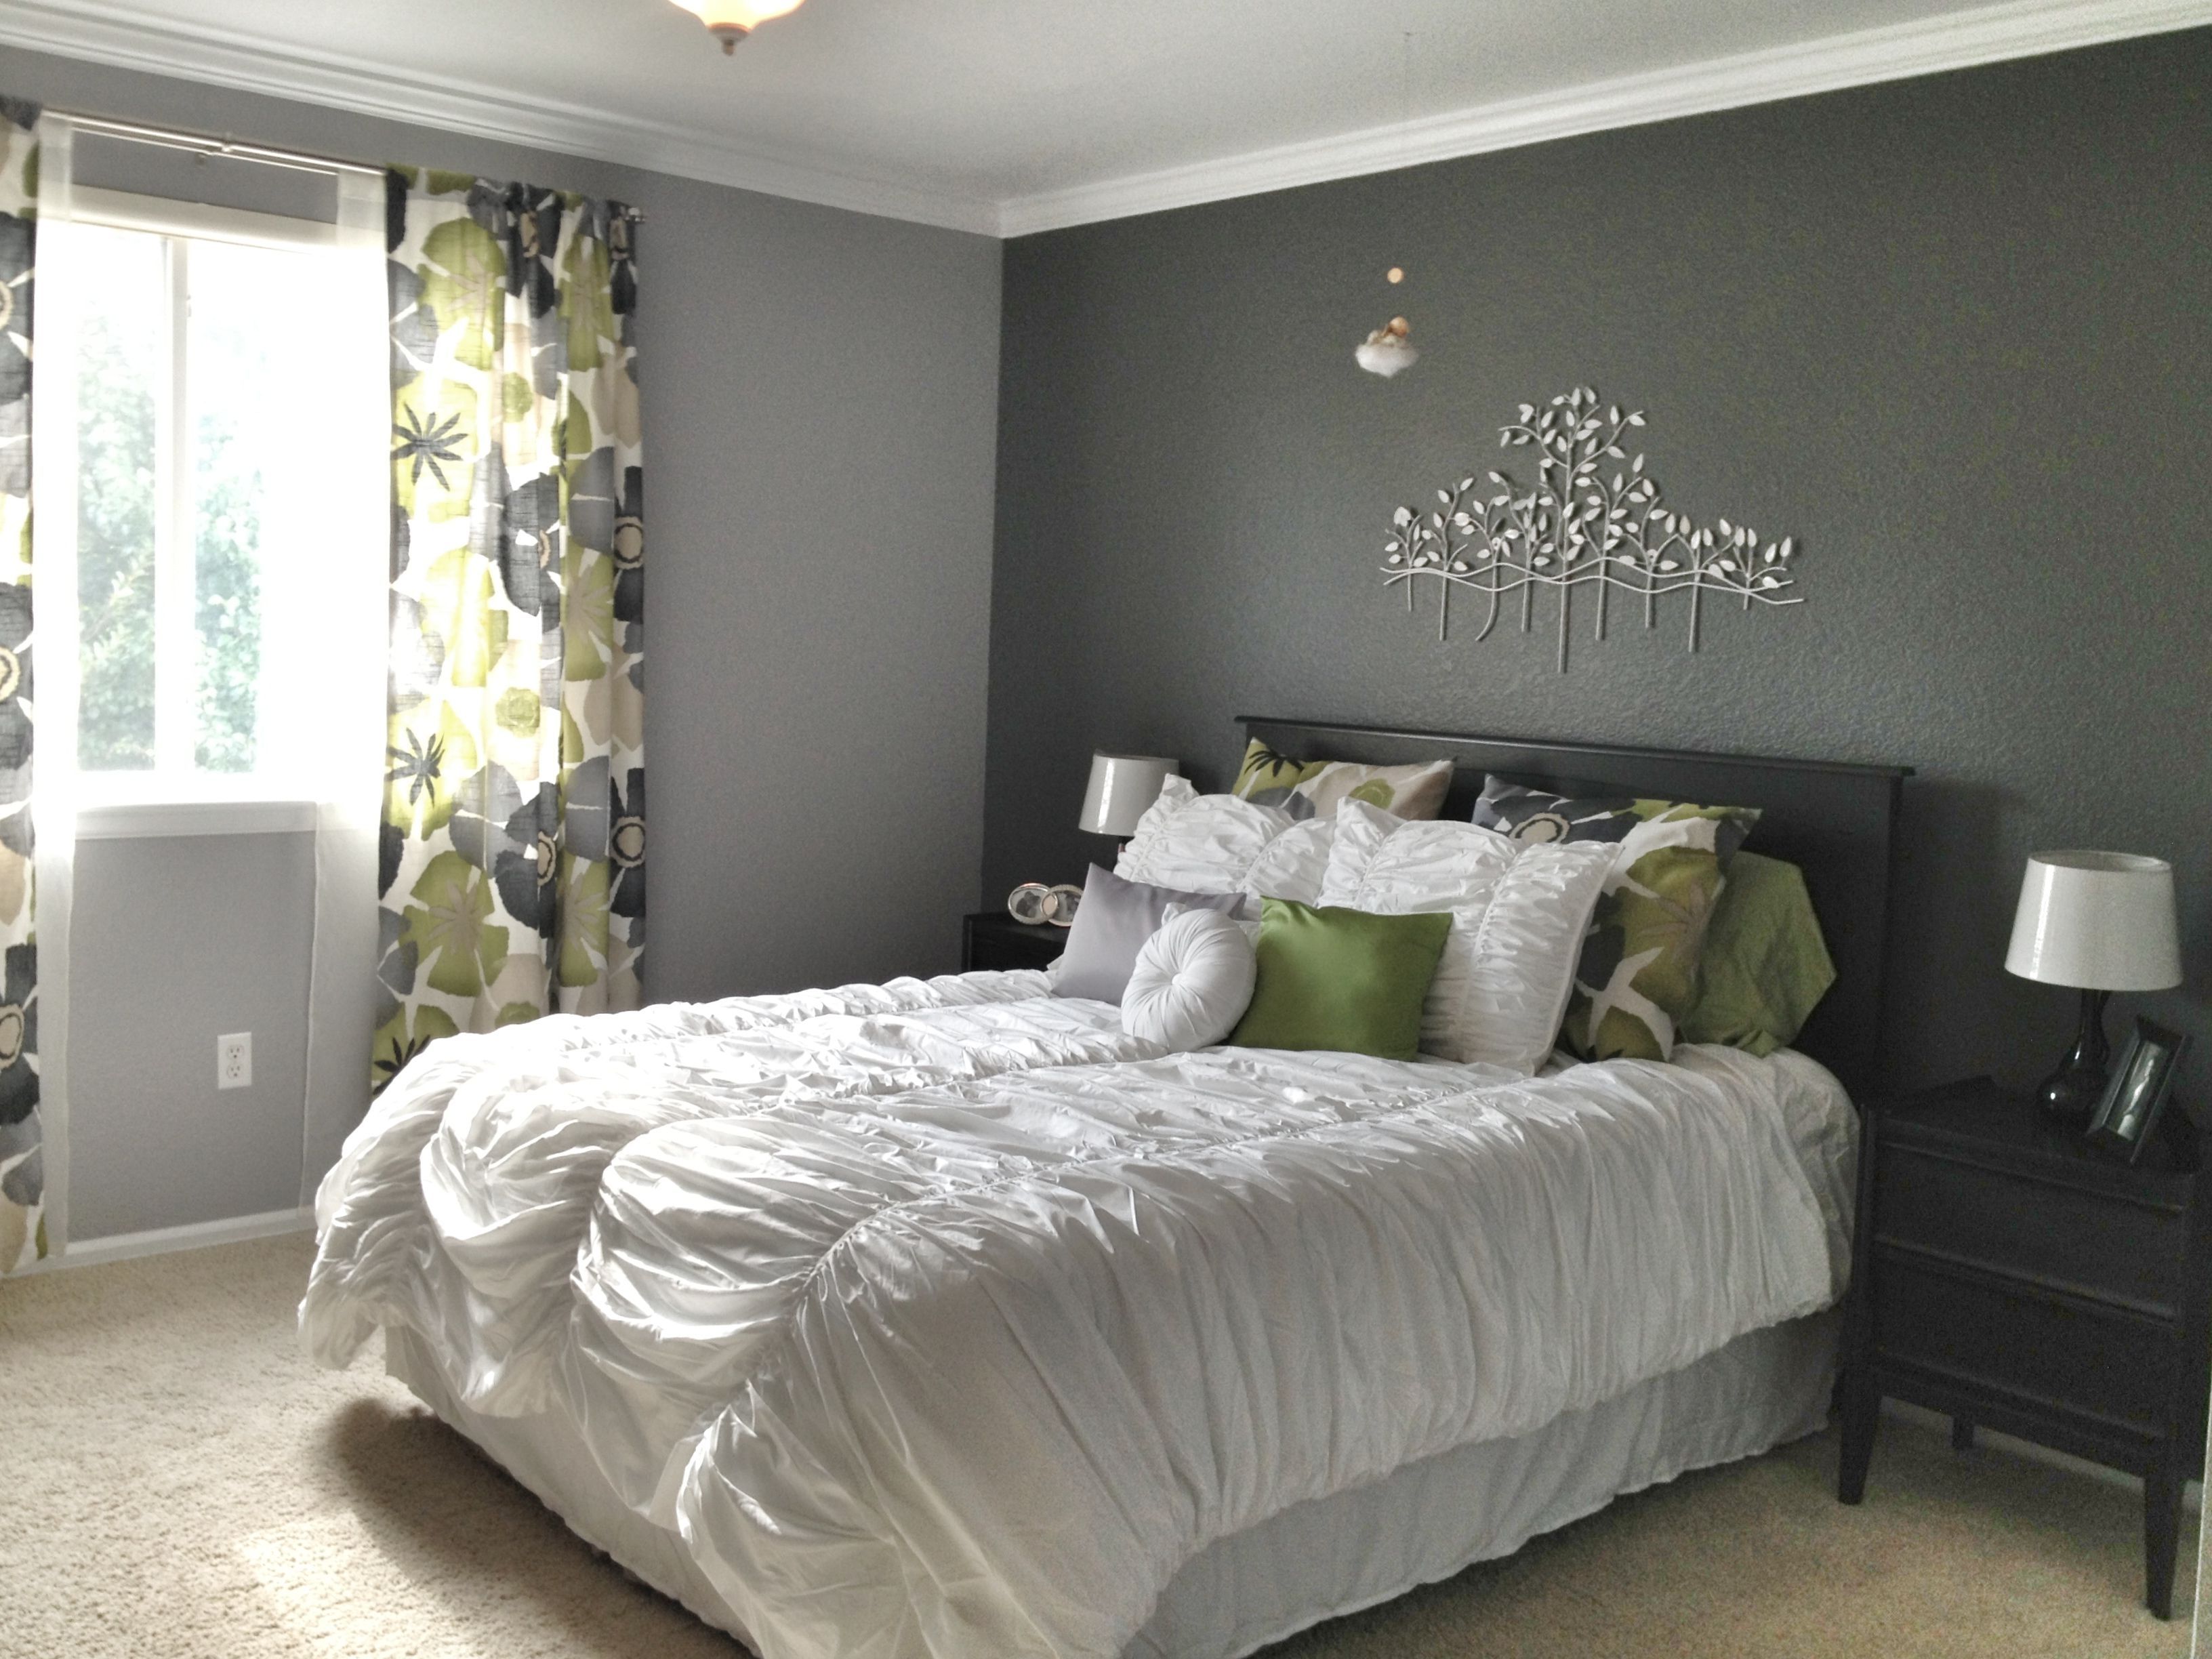 Fashionable Grey And White Wall Accents With Regard To Grey Master Bedroom – Dark Accent Wall, Fun Patterned Curtains (View 1 of 15)